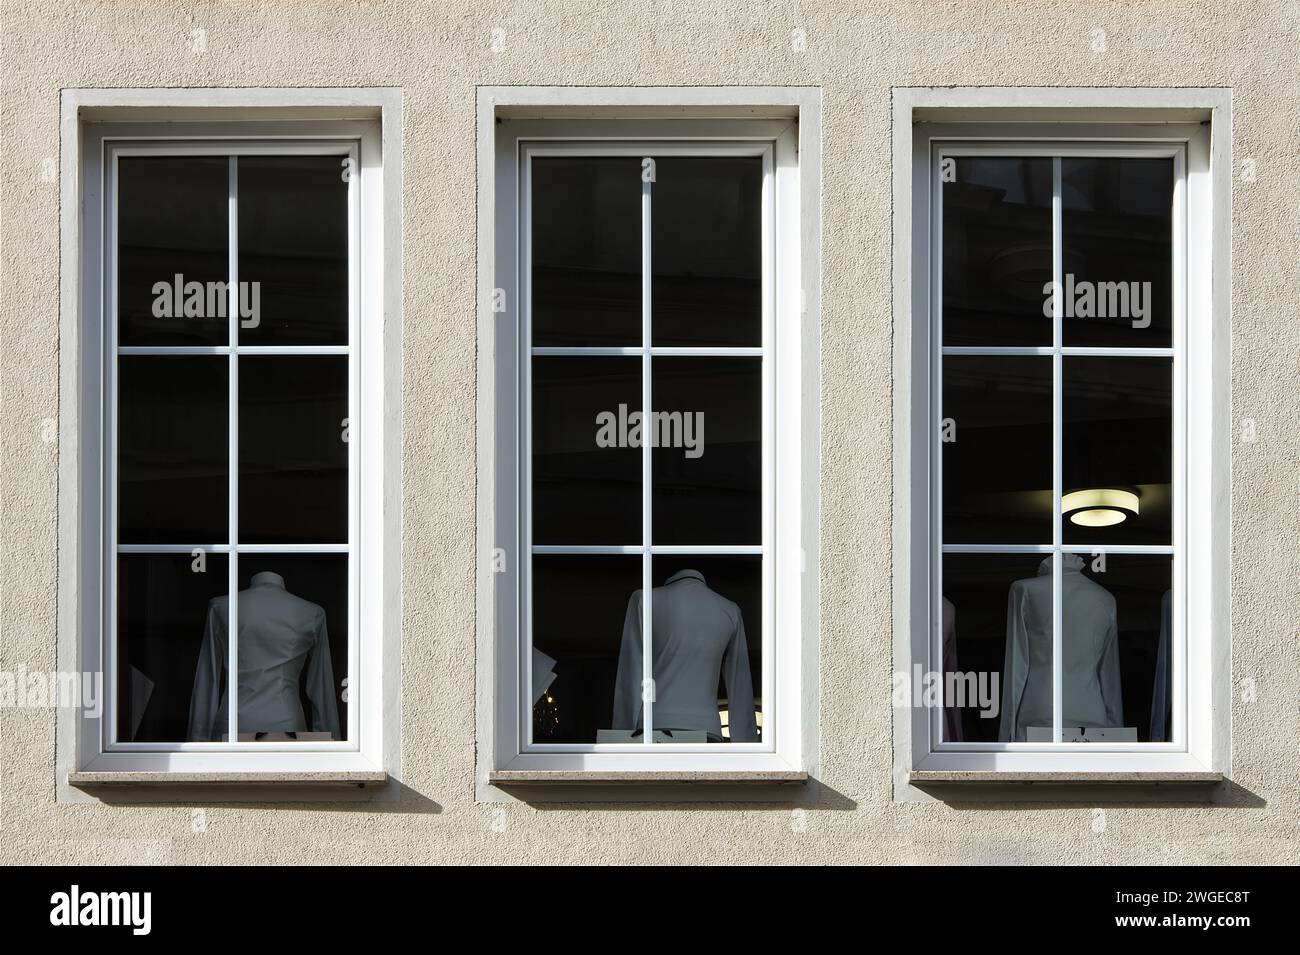 Part view of a facade with tree windows viewing three mannequins in white shirts Stock Photo